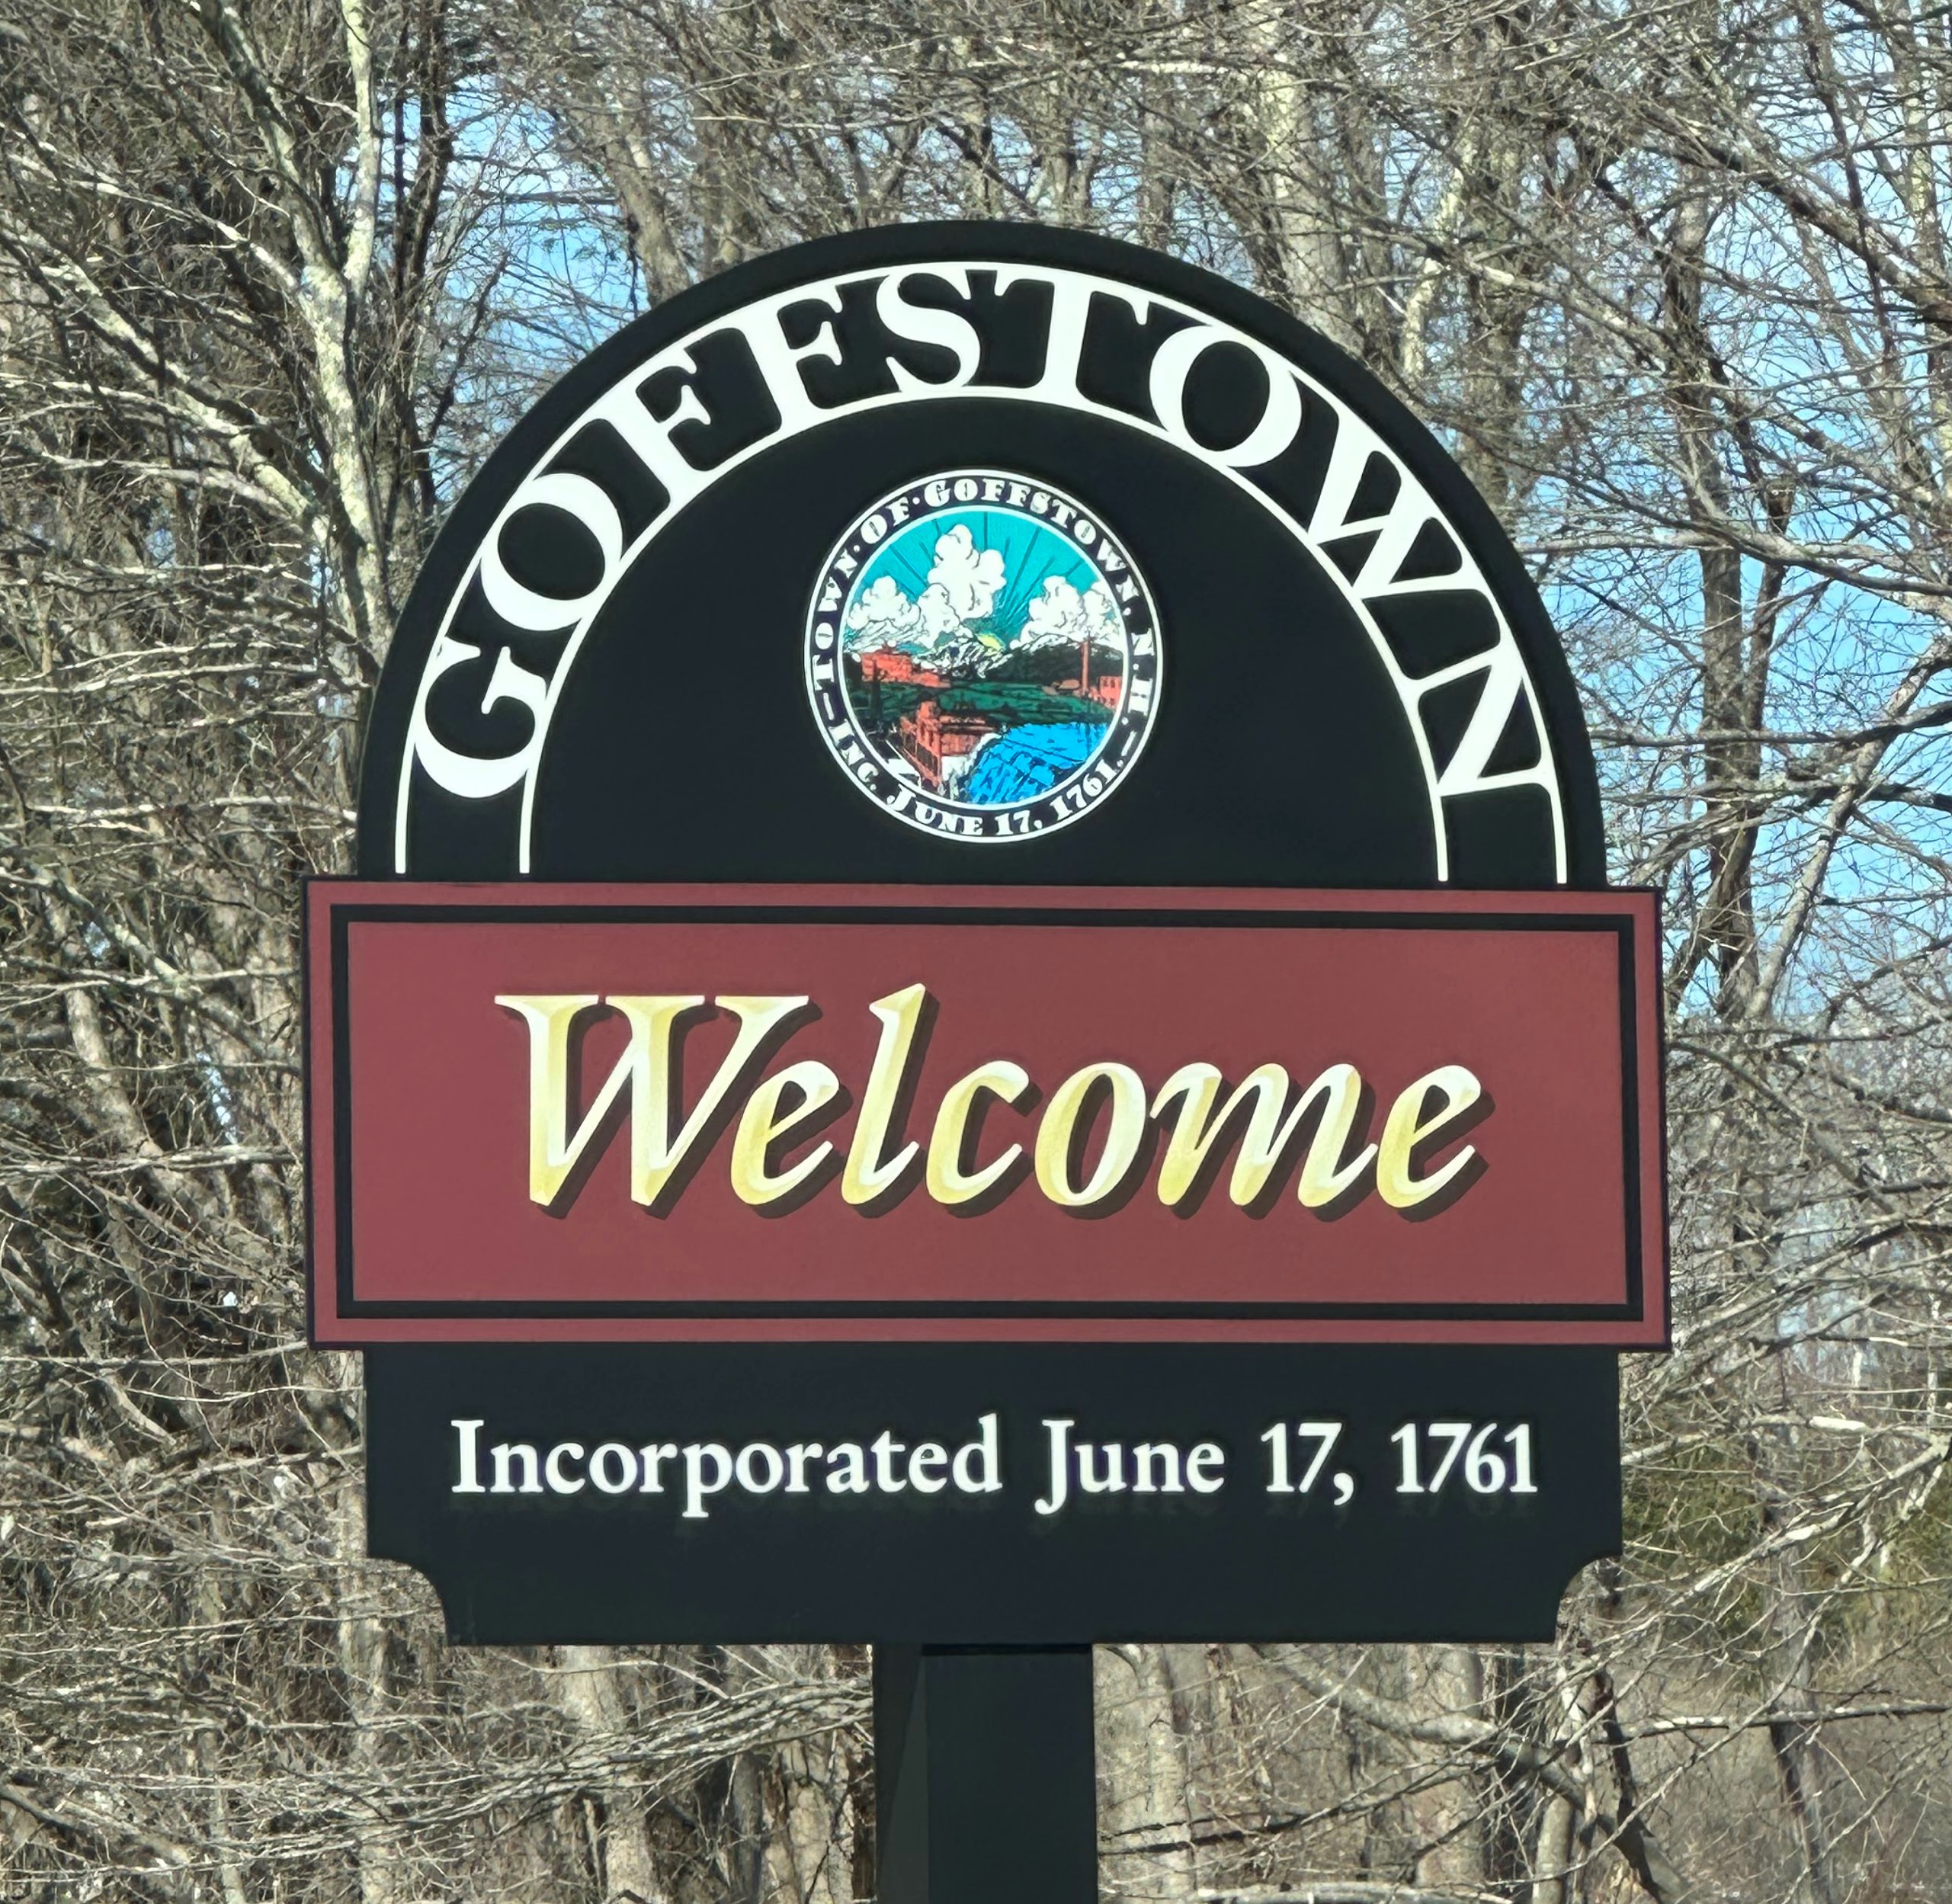 The photo of the Goffstown town sign is the word 'Goffstown' in an arch at the top of a large black sign, and at the base, it reads 'Incorporated June 17th, 1761.' Slightly above the bottom line is a large 'welcome' with a red background, and above that but below the Goffstown arch is a smaller circle with an illustrated picture of a small waterfall and sunrise, encircled by the words 'Town of Goffstown - Inc June 17, 1761'